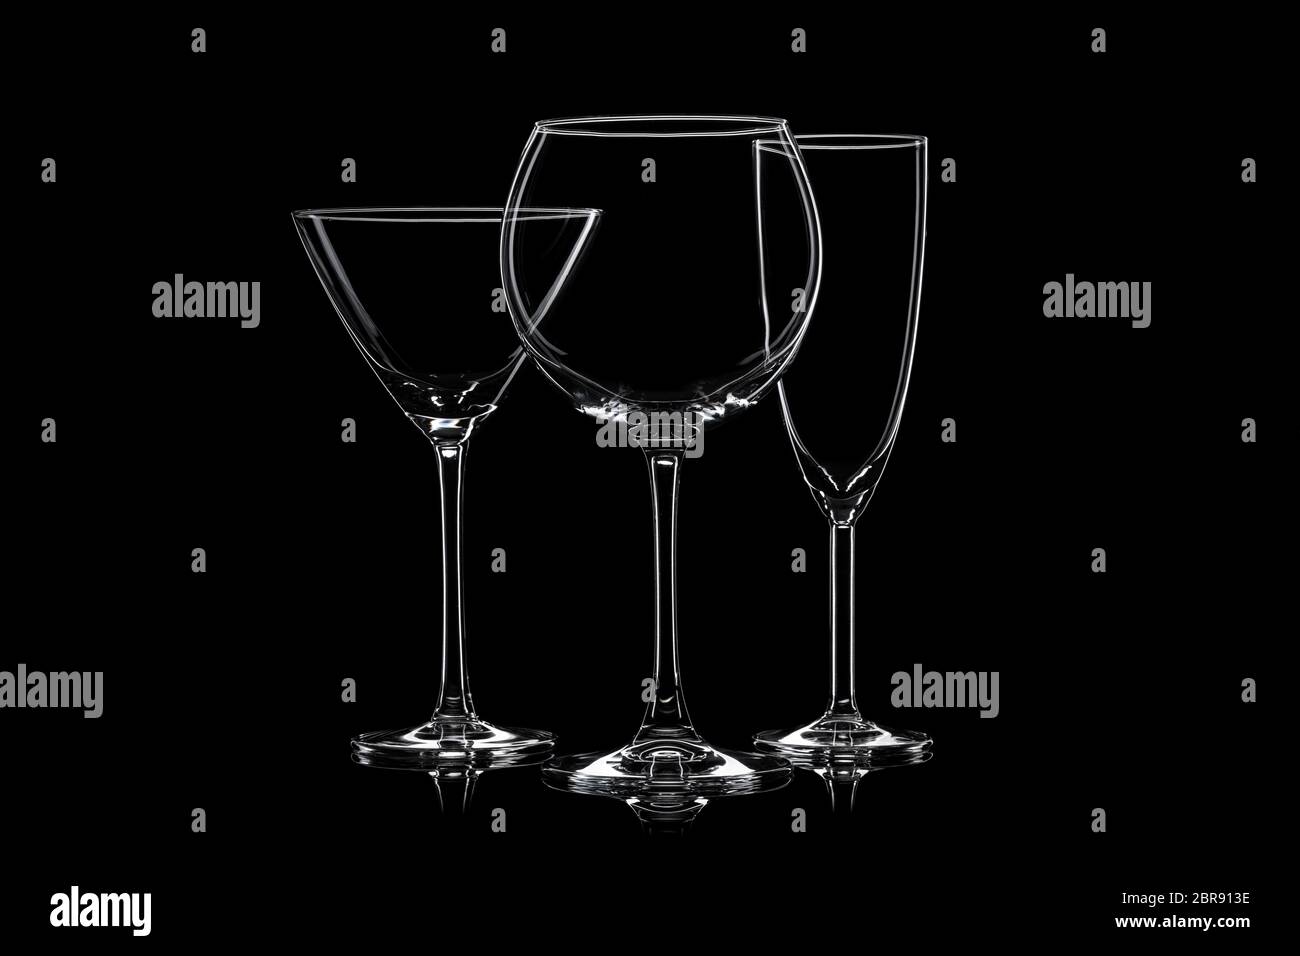 Empty cocktail glassware on a black background. Stock Photo